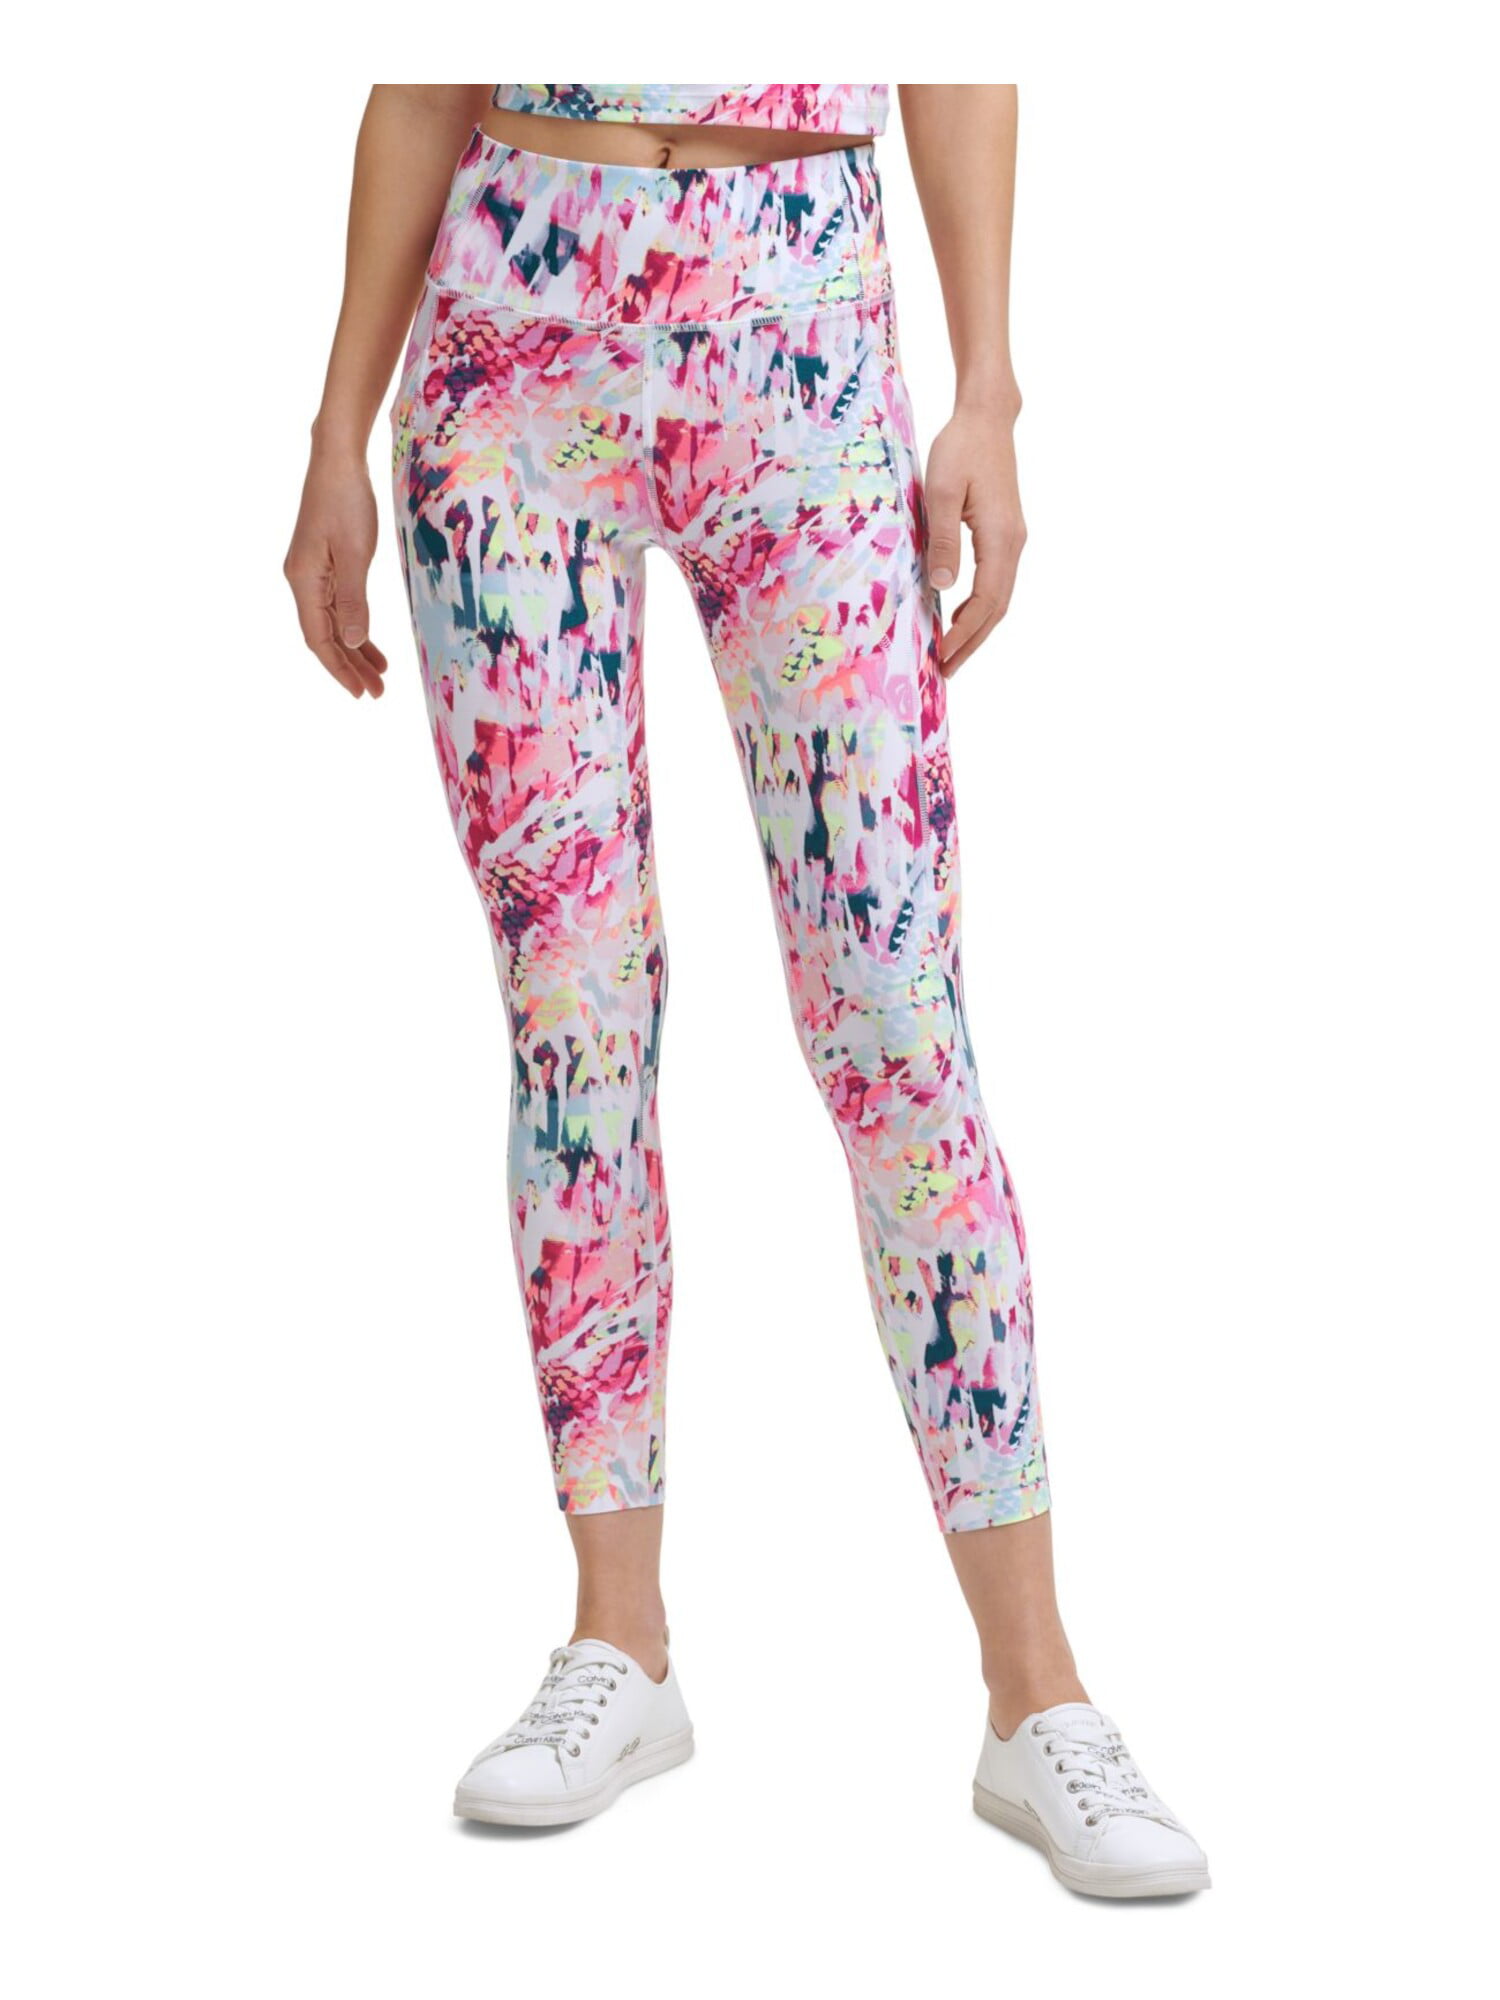  EVCR High Waisted Crossover Band Leggings for Women - 7/8  (Medium, Cotton Candy Floral Garden) Pink : Clothing, Shoes & Jewelry